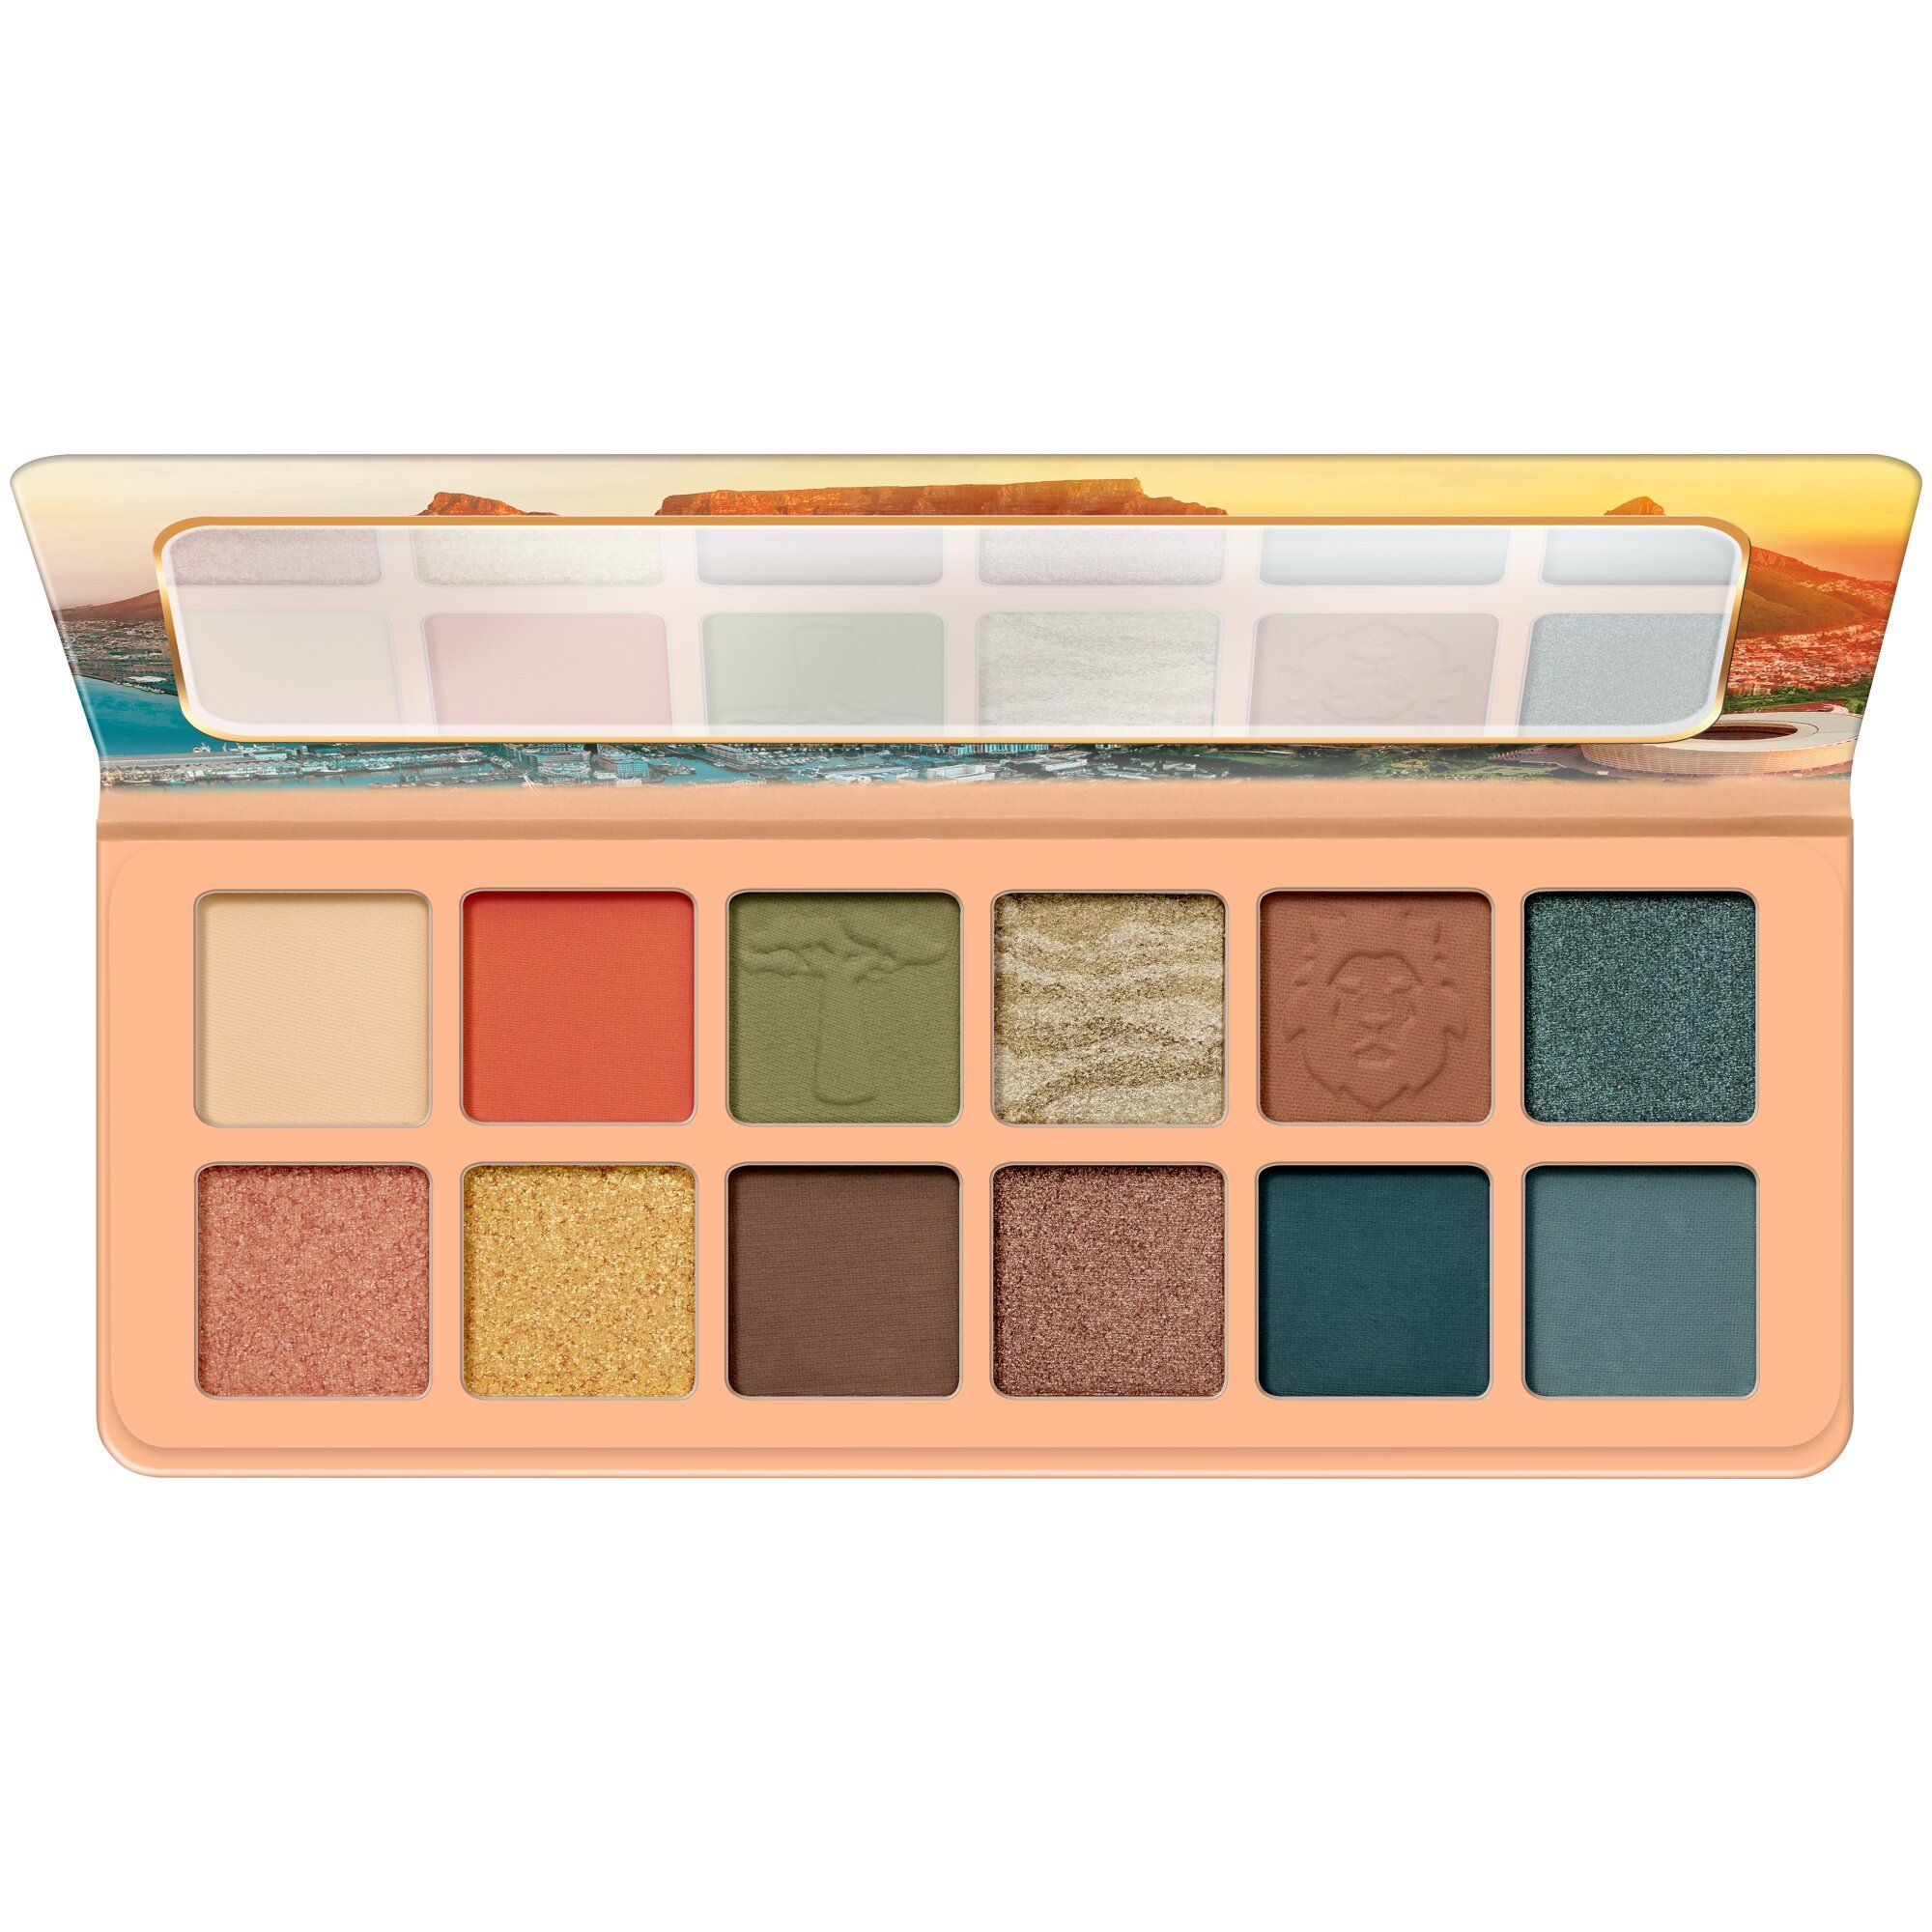 Essence Welcome To Cape Town Eyeshadow Palette , CVS